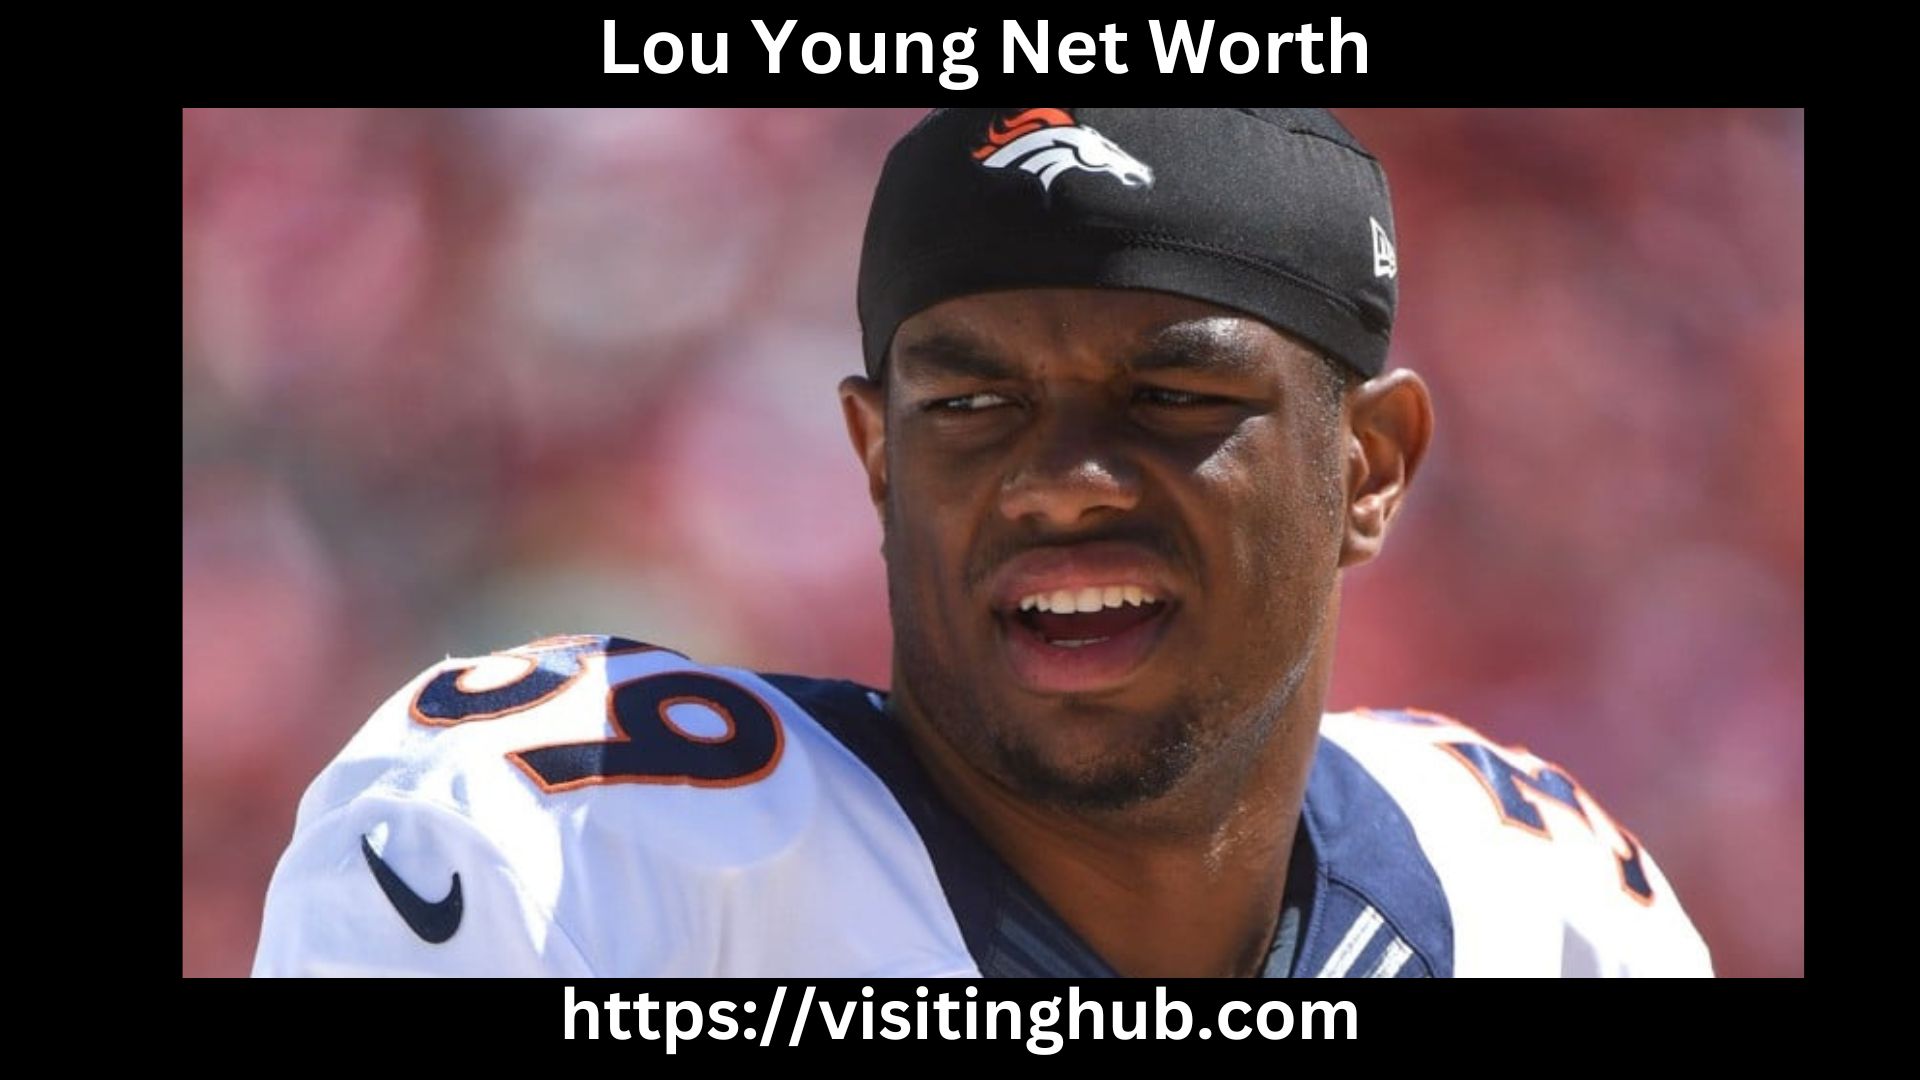 Lou Young Net Worth